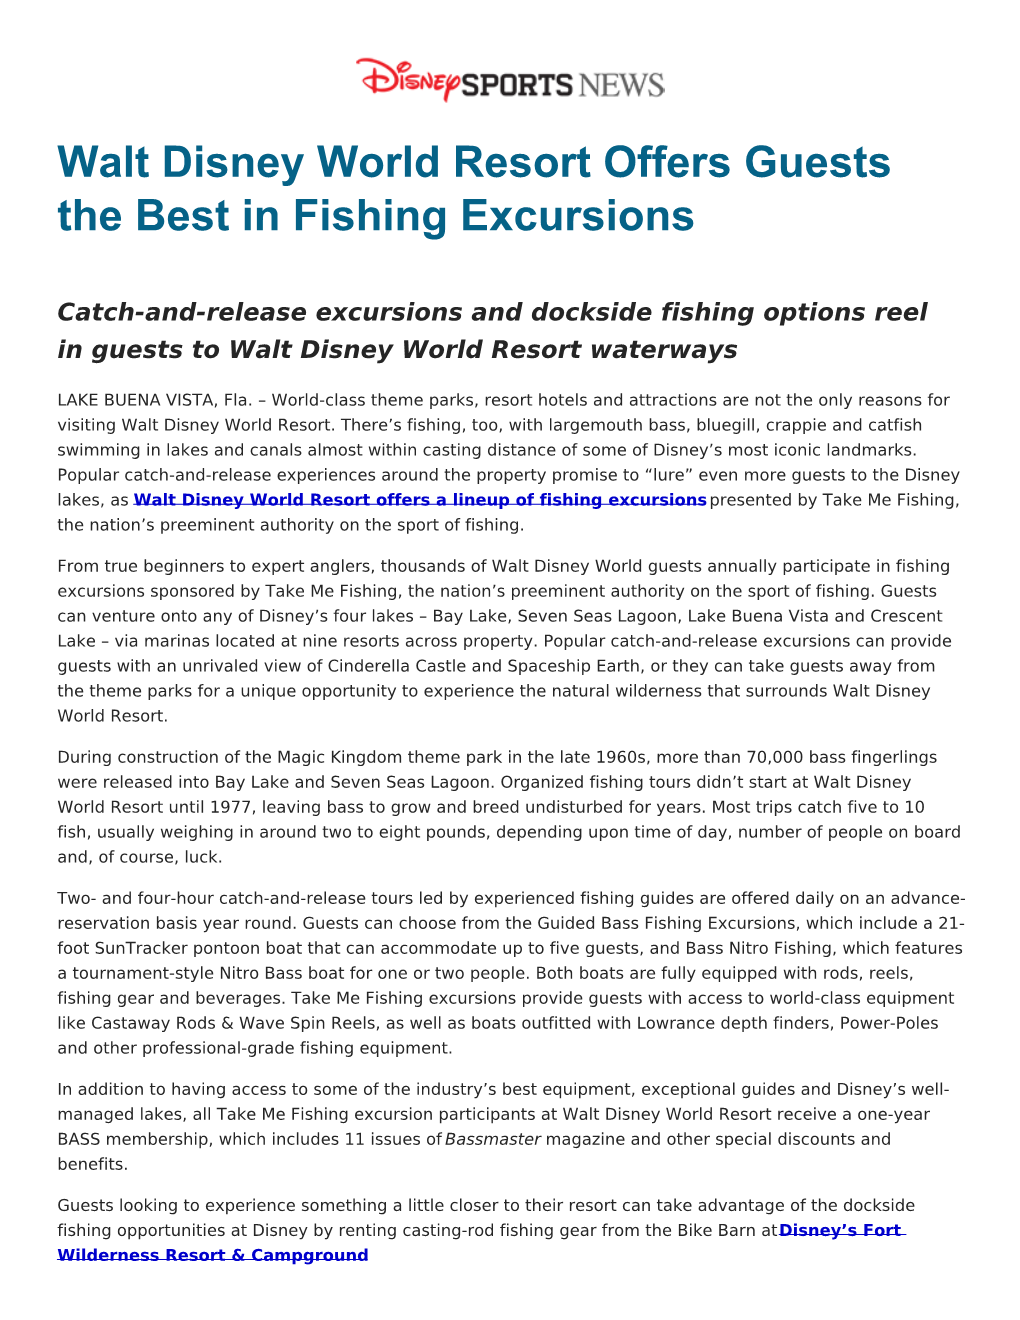 Walt Disney World Resort Offers Guests the Best in Fishing Excursions